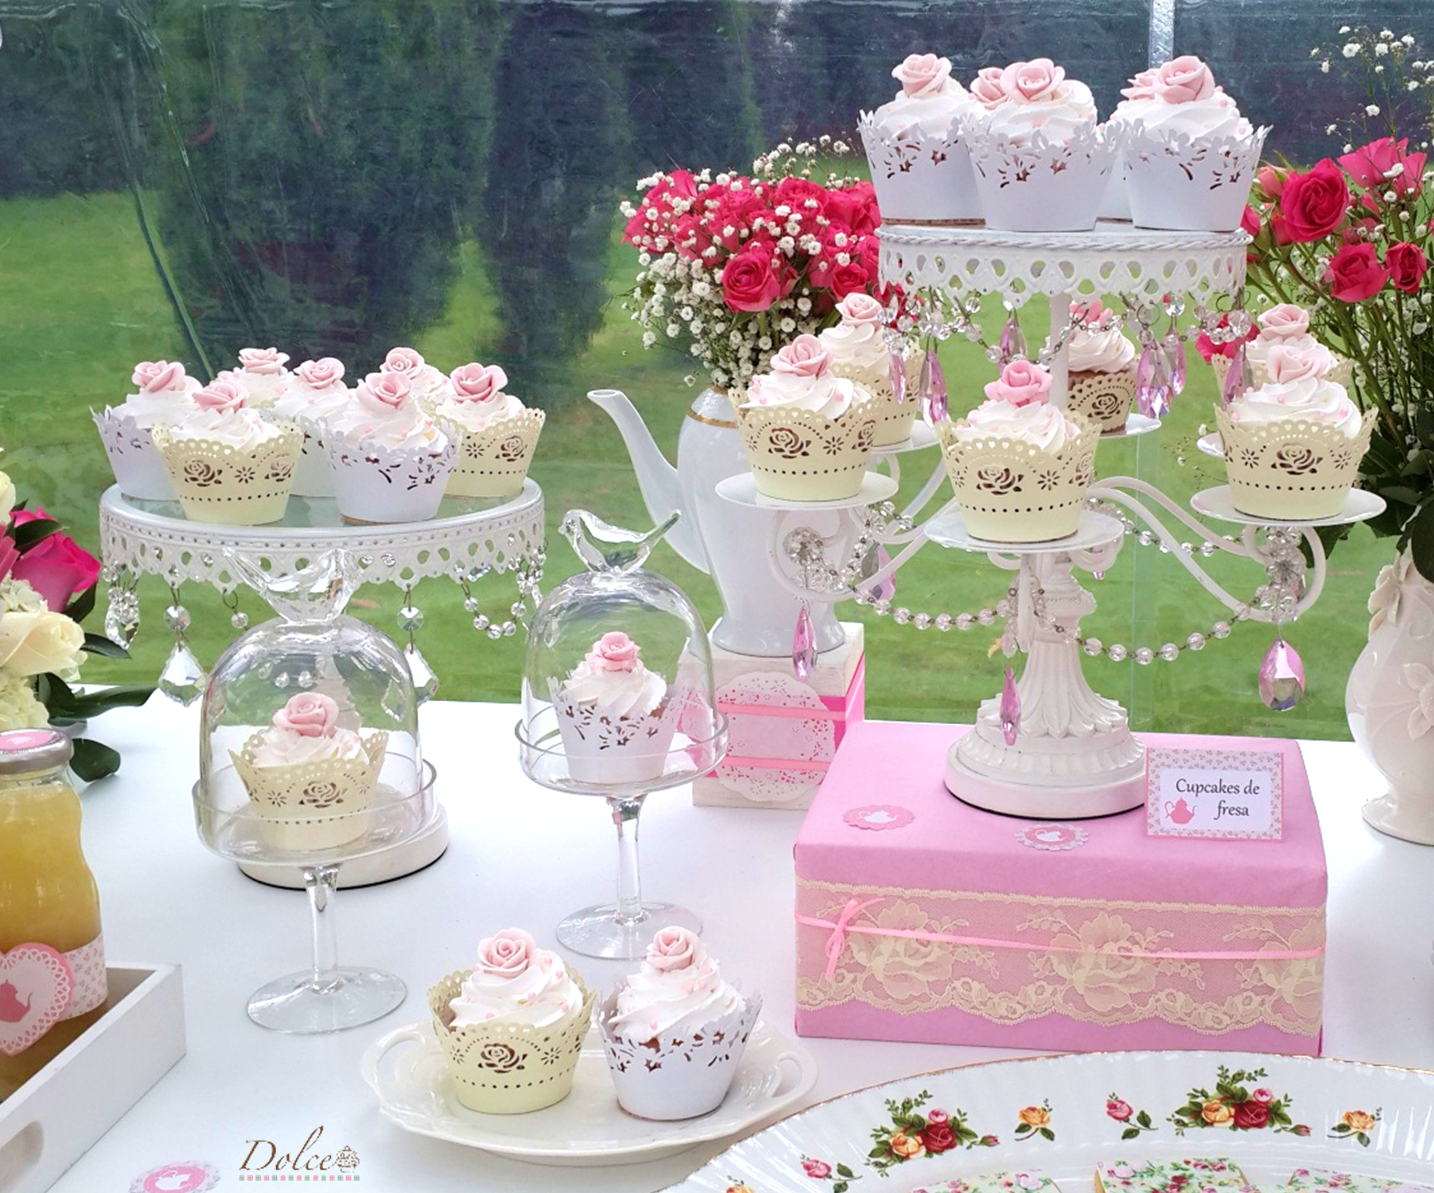 http://everydaypartymag.com/wp-content/uploads/2015/05/Garden-Tea-Party-DCB1.png